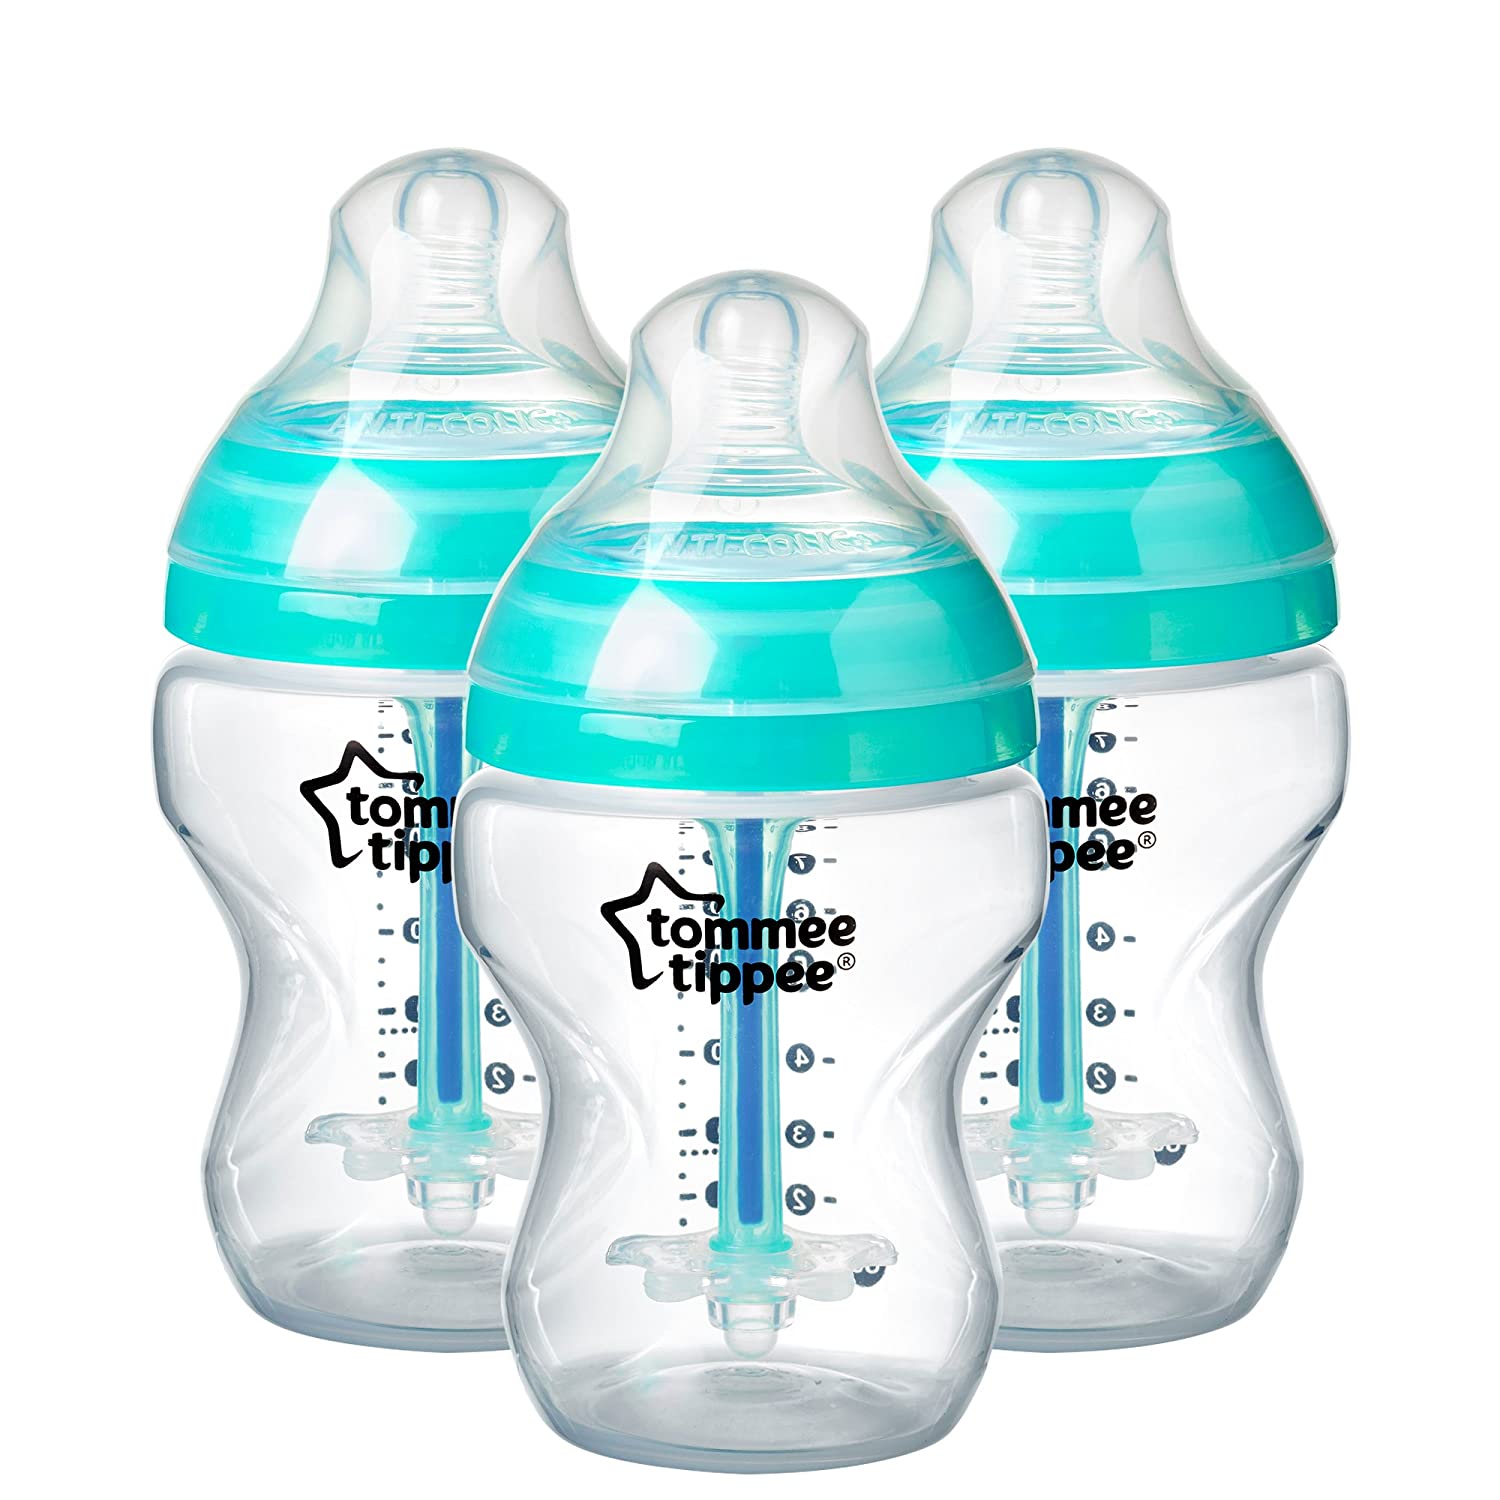 Tommee Tippee Advanced Anti-Colic Baby Bottle, Breast-like Teat and Heat Sensor Technology, 260 ml, Pack of 3, Clear